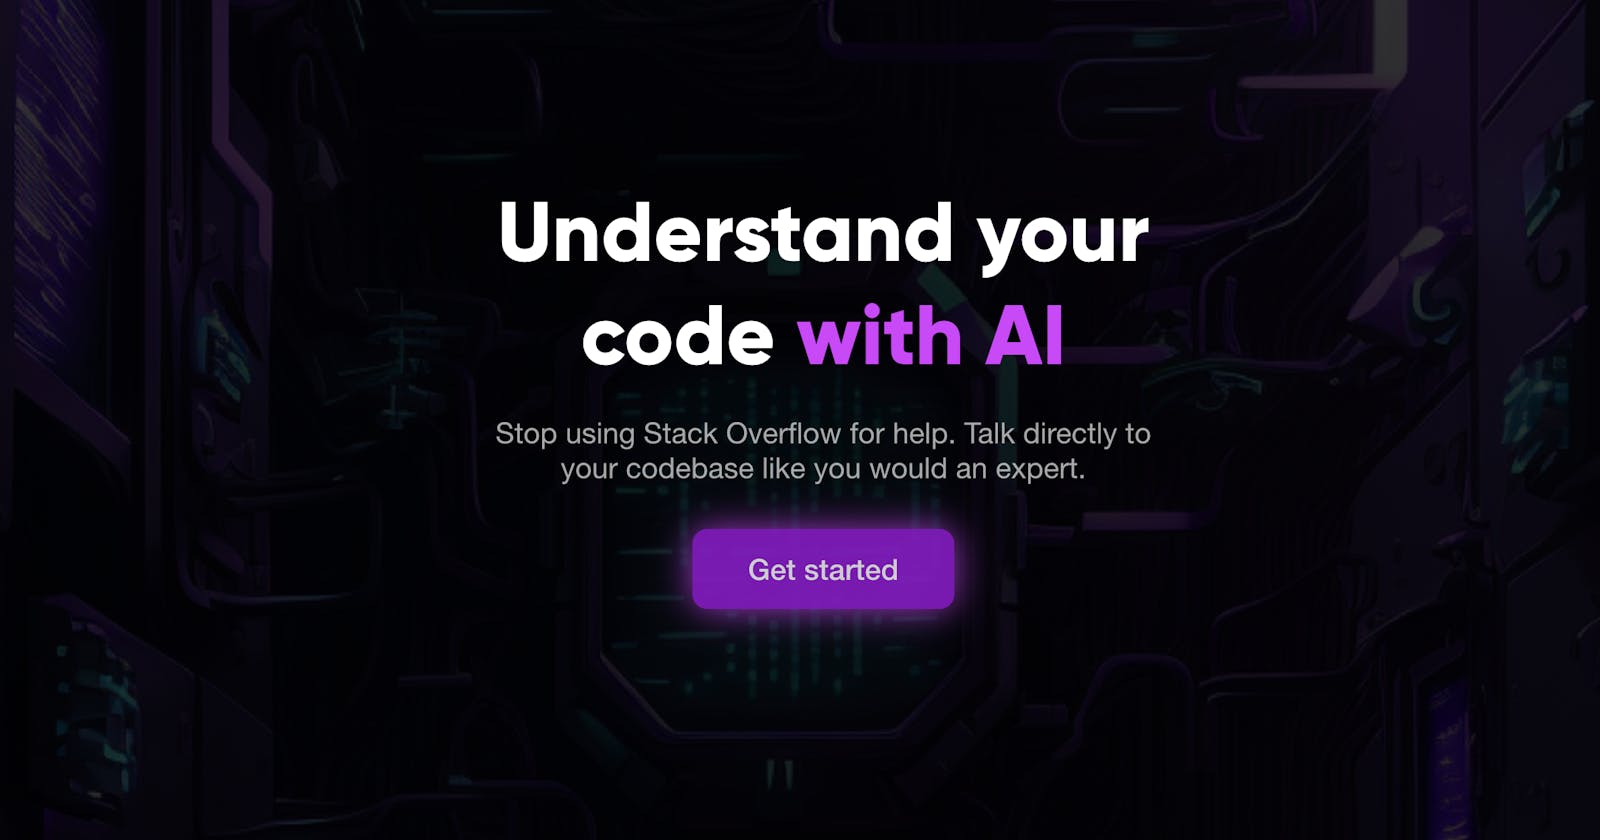 Adrenaline.ai wants you to talk to your codebase.